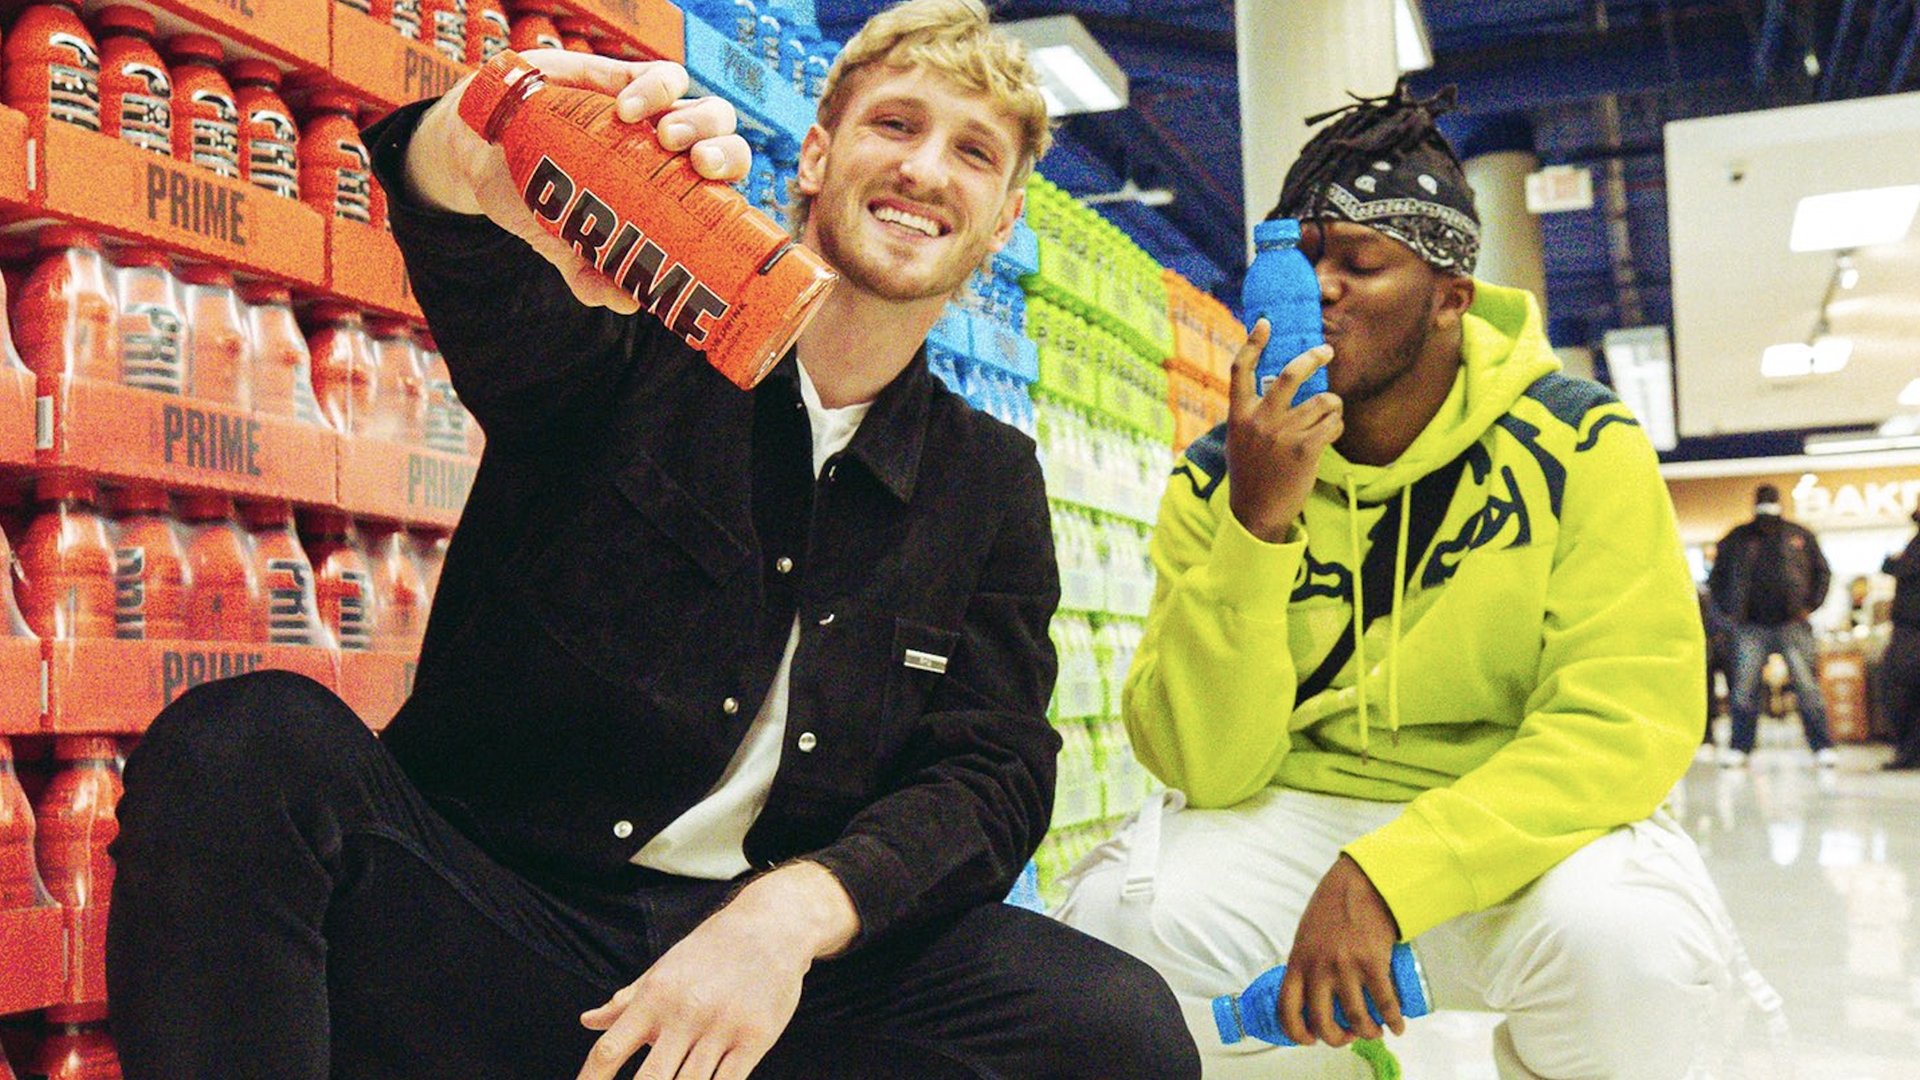 Logan Paul and KSI's Prime Hydration drink is 'selling for TWELVE times US retail value' in England. The US Sun